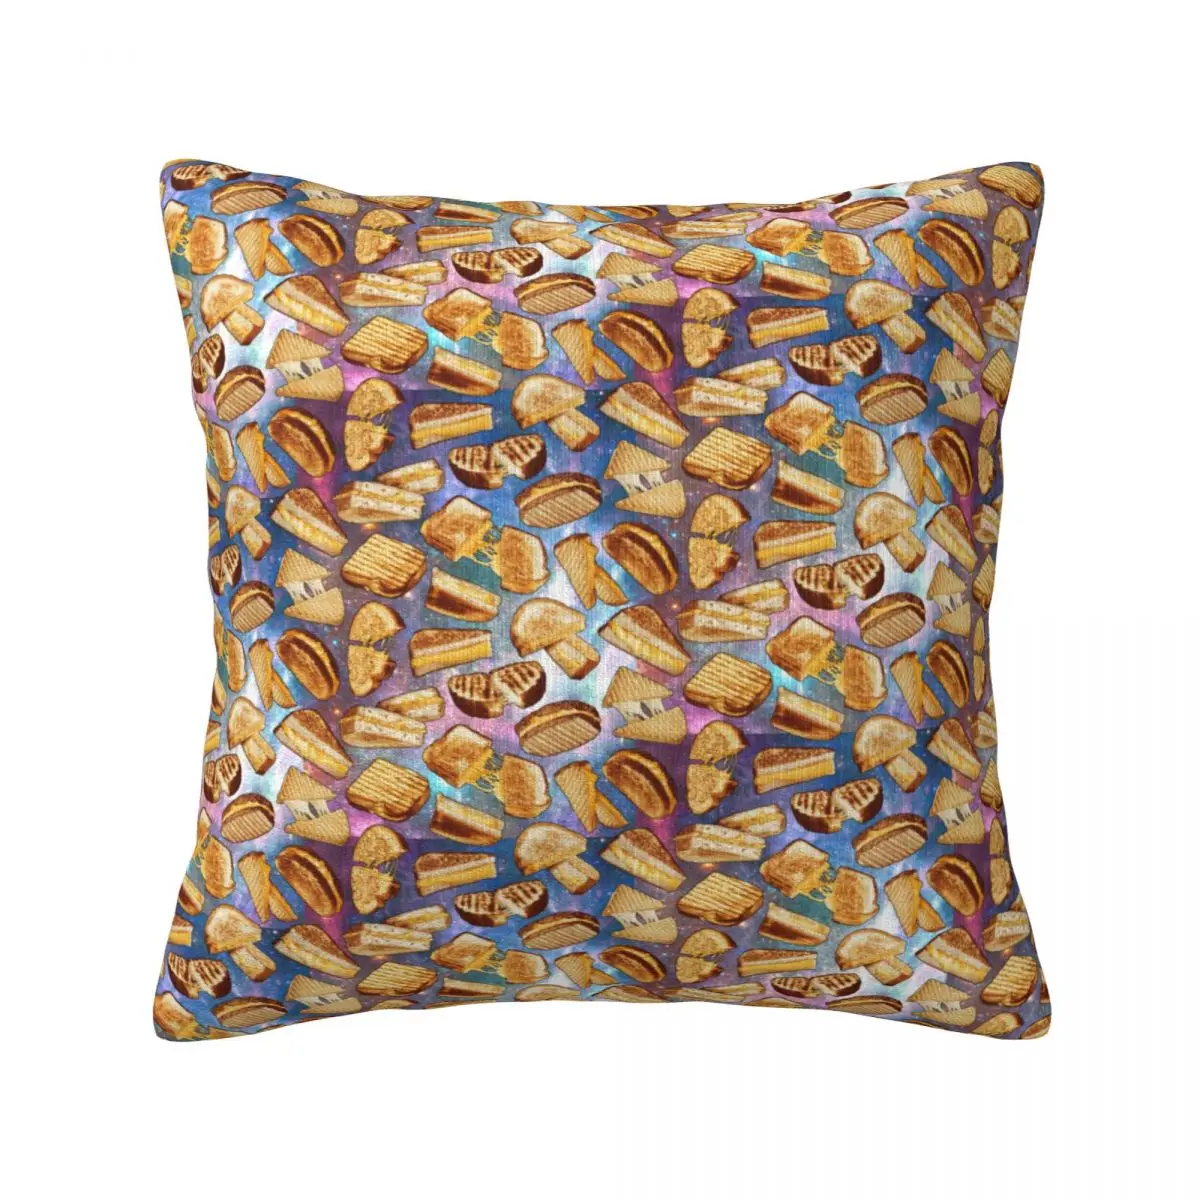 

Space Grilled Cheese Pattern Throw Pillow Cover Decorative Pillow Covers Home Pillows Shells Cushion Cover Zippered Pillowcase